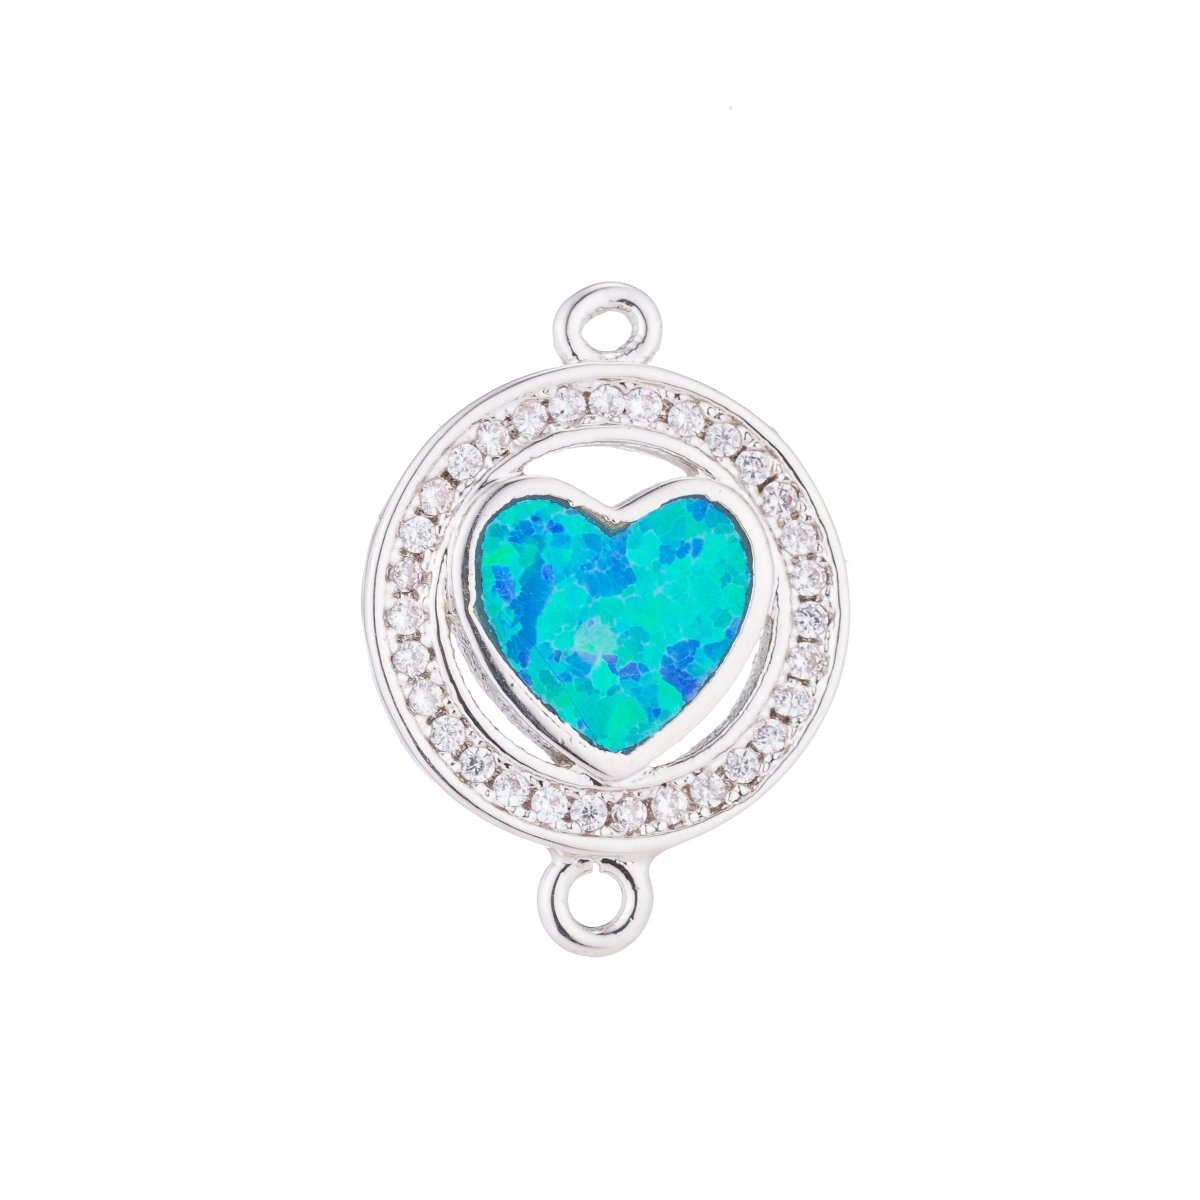 Silver, Gold, Black Gold Heart with Green/Blue Opal, Circle of Love, Cubic Zirconia Bracelet Charm Bead Finding CONNECTOR For Jewelry Making | F-125 - DLUXCA